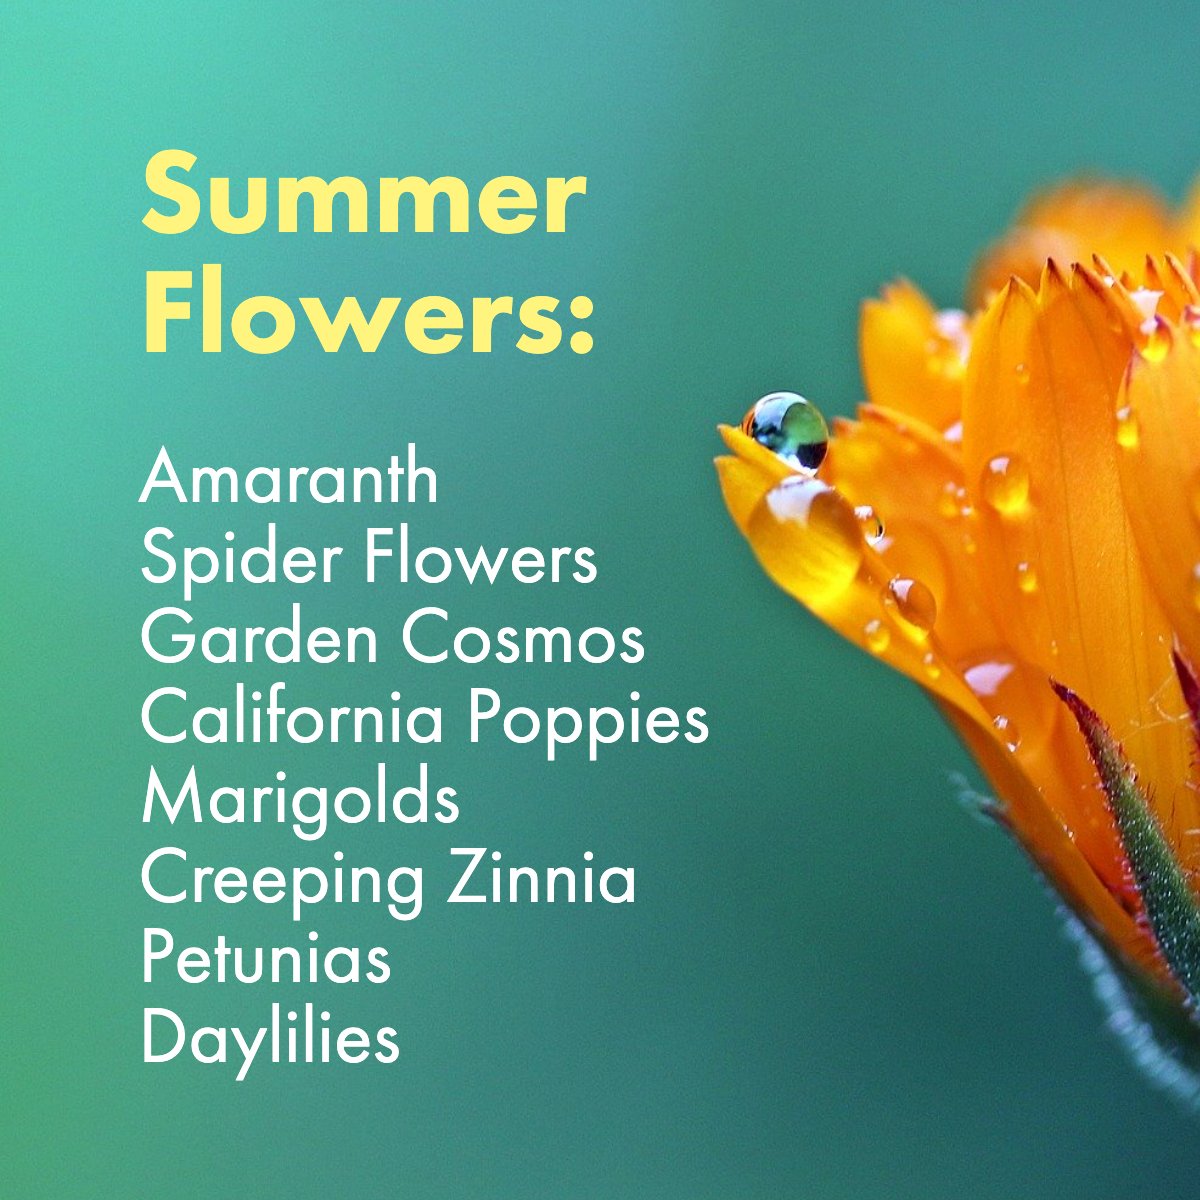 Summer is a time when your garden delivers a riot of color and texture, not to mention attracting beautiful butterflies and hummingbirds. 🌼🌺🦋

#summerflowersinbloom    #summerflowers🌻    #summertimeflowers    #flowerssummer
#keepingitrealestate #therealREALTOR